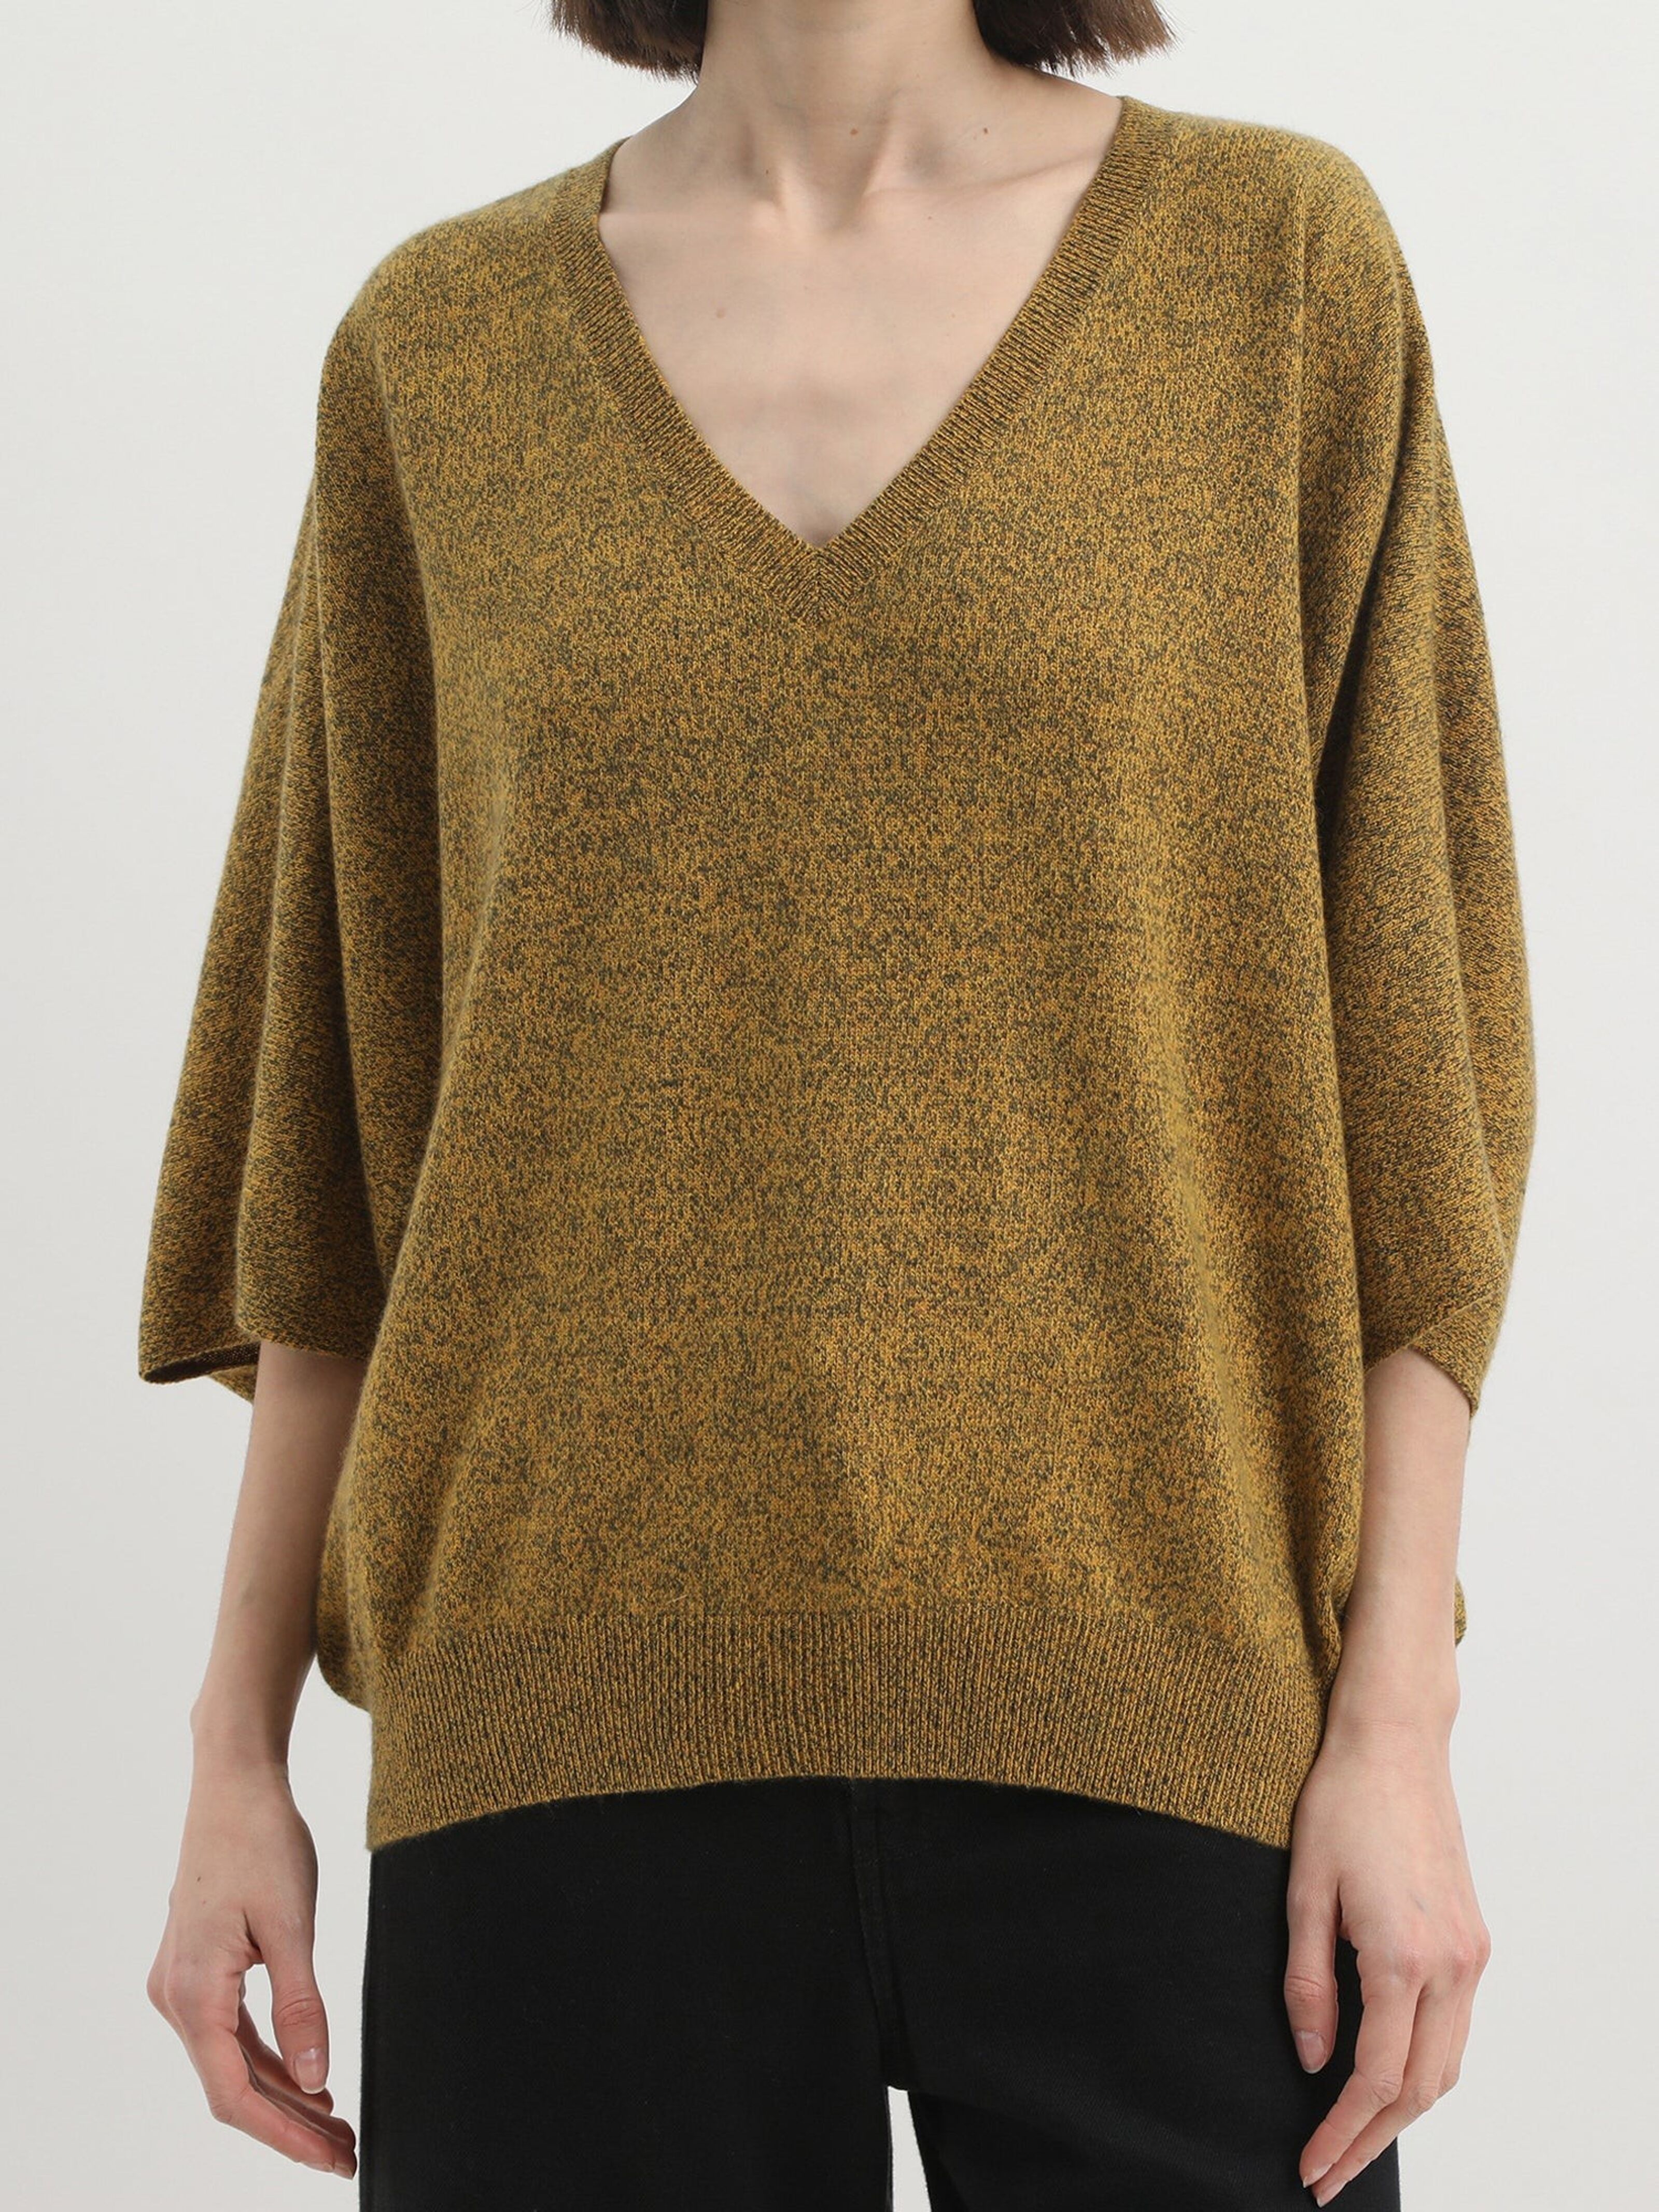 Buy wholesale POLO V-neck sweater with short sleeves - 100% yellow cashmere